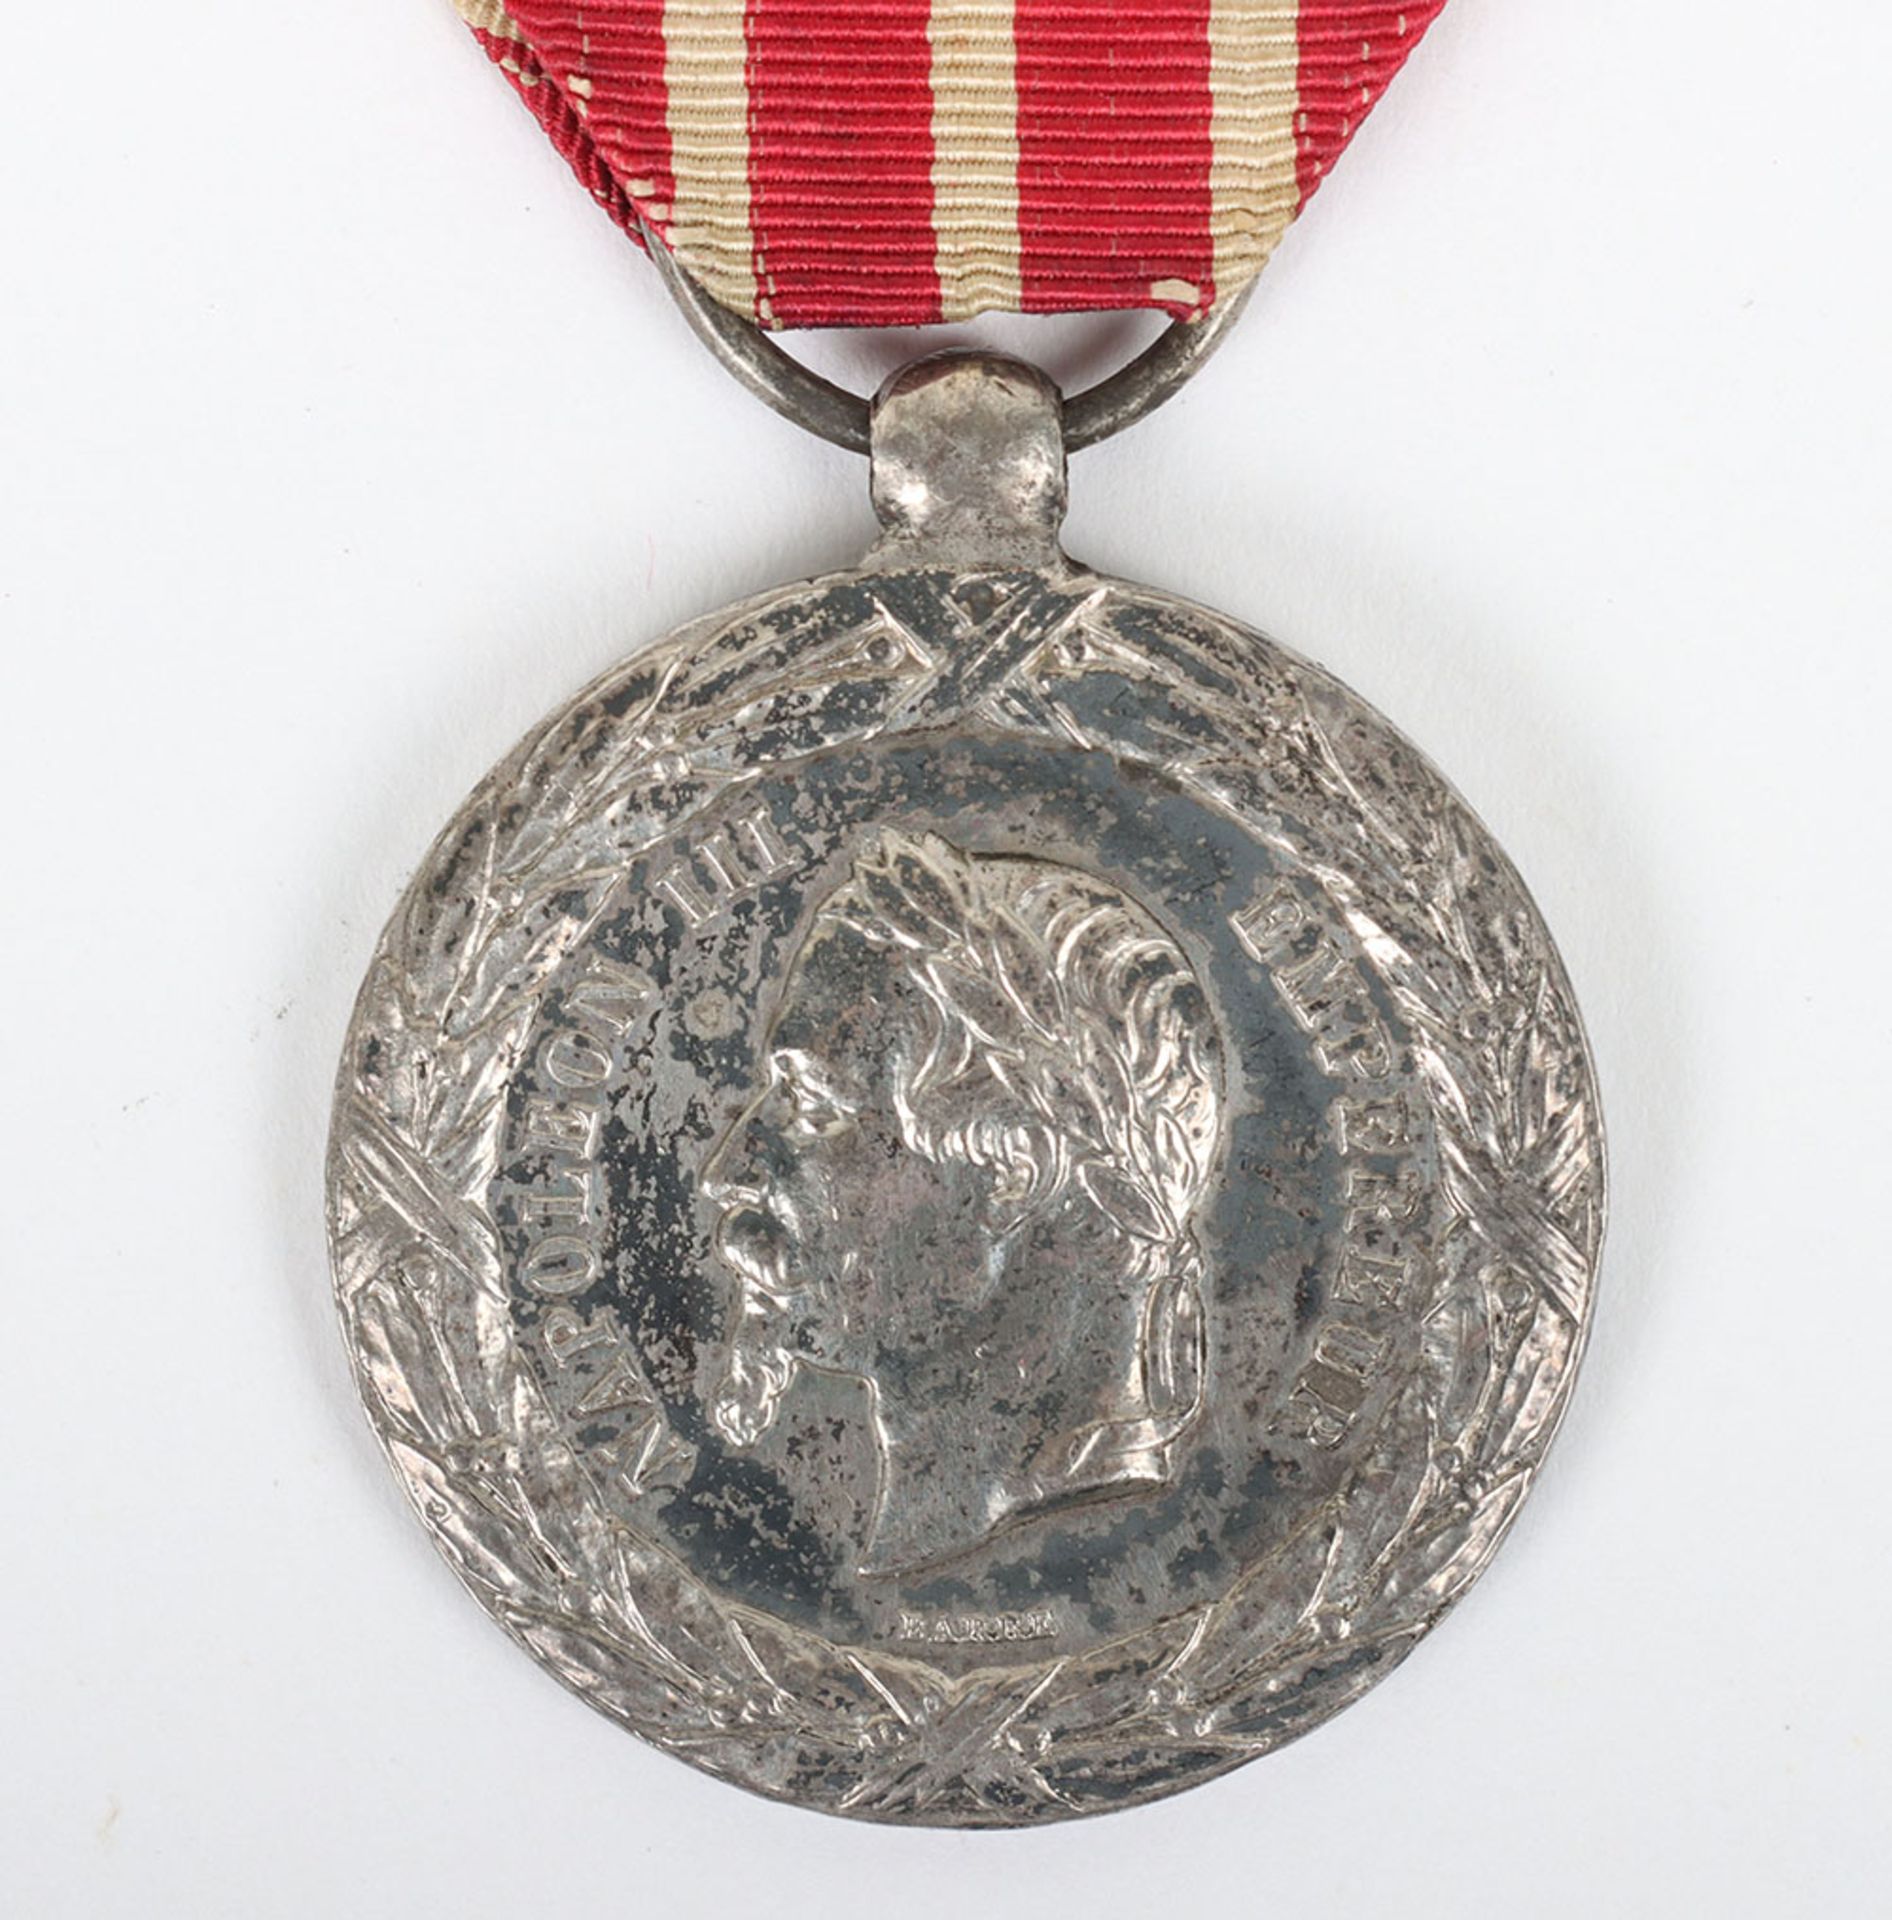 French 1859 Italian Campaign Napoleon III Medal - Image 2 of 4